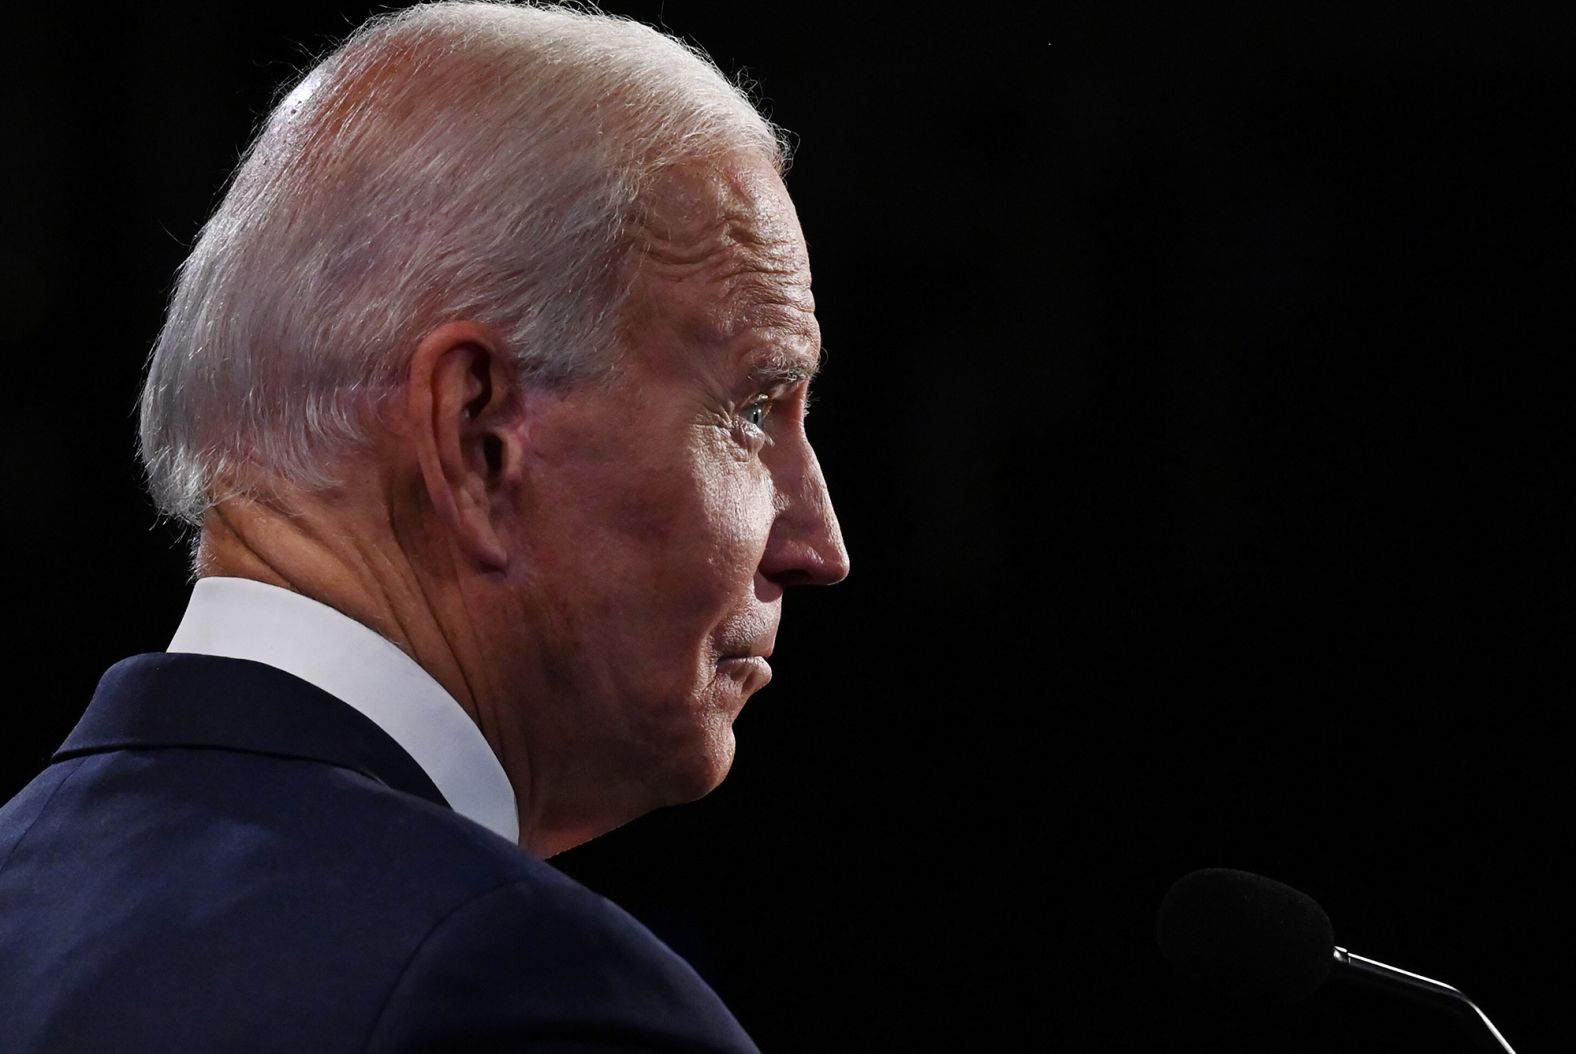 Biden entered Tuesday night's debate <a href="index.php?page=&url=https%3A%2F%2Fwww.cnn.com%2Fpolitics%2Flive-news%2Fpresidential-debate-coverage-fact-check-09-29-20%2Fh_bc1672280759f84b685cf350c92d2cf0" target="_blank">leading in the polls.</a>